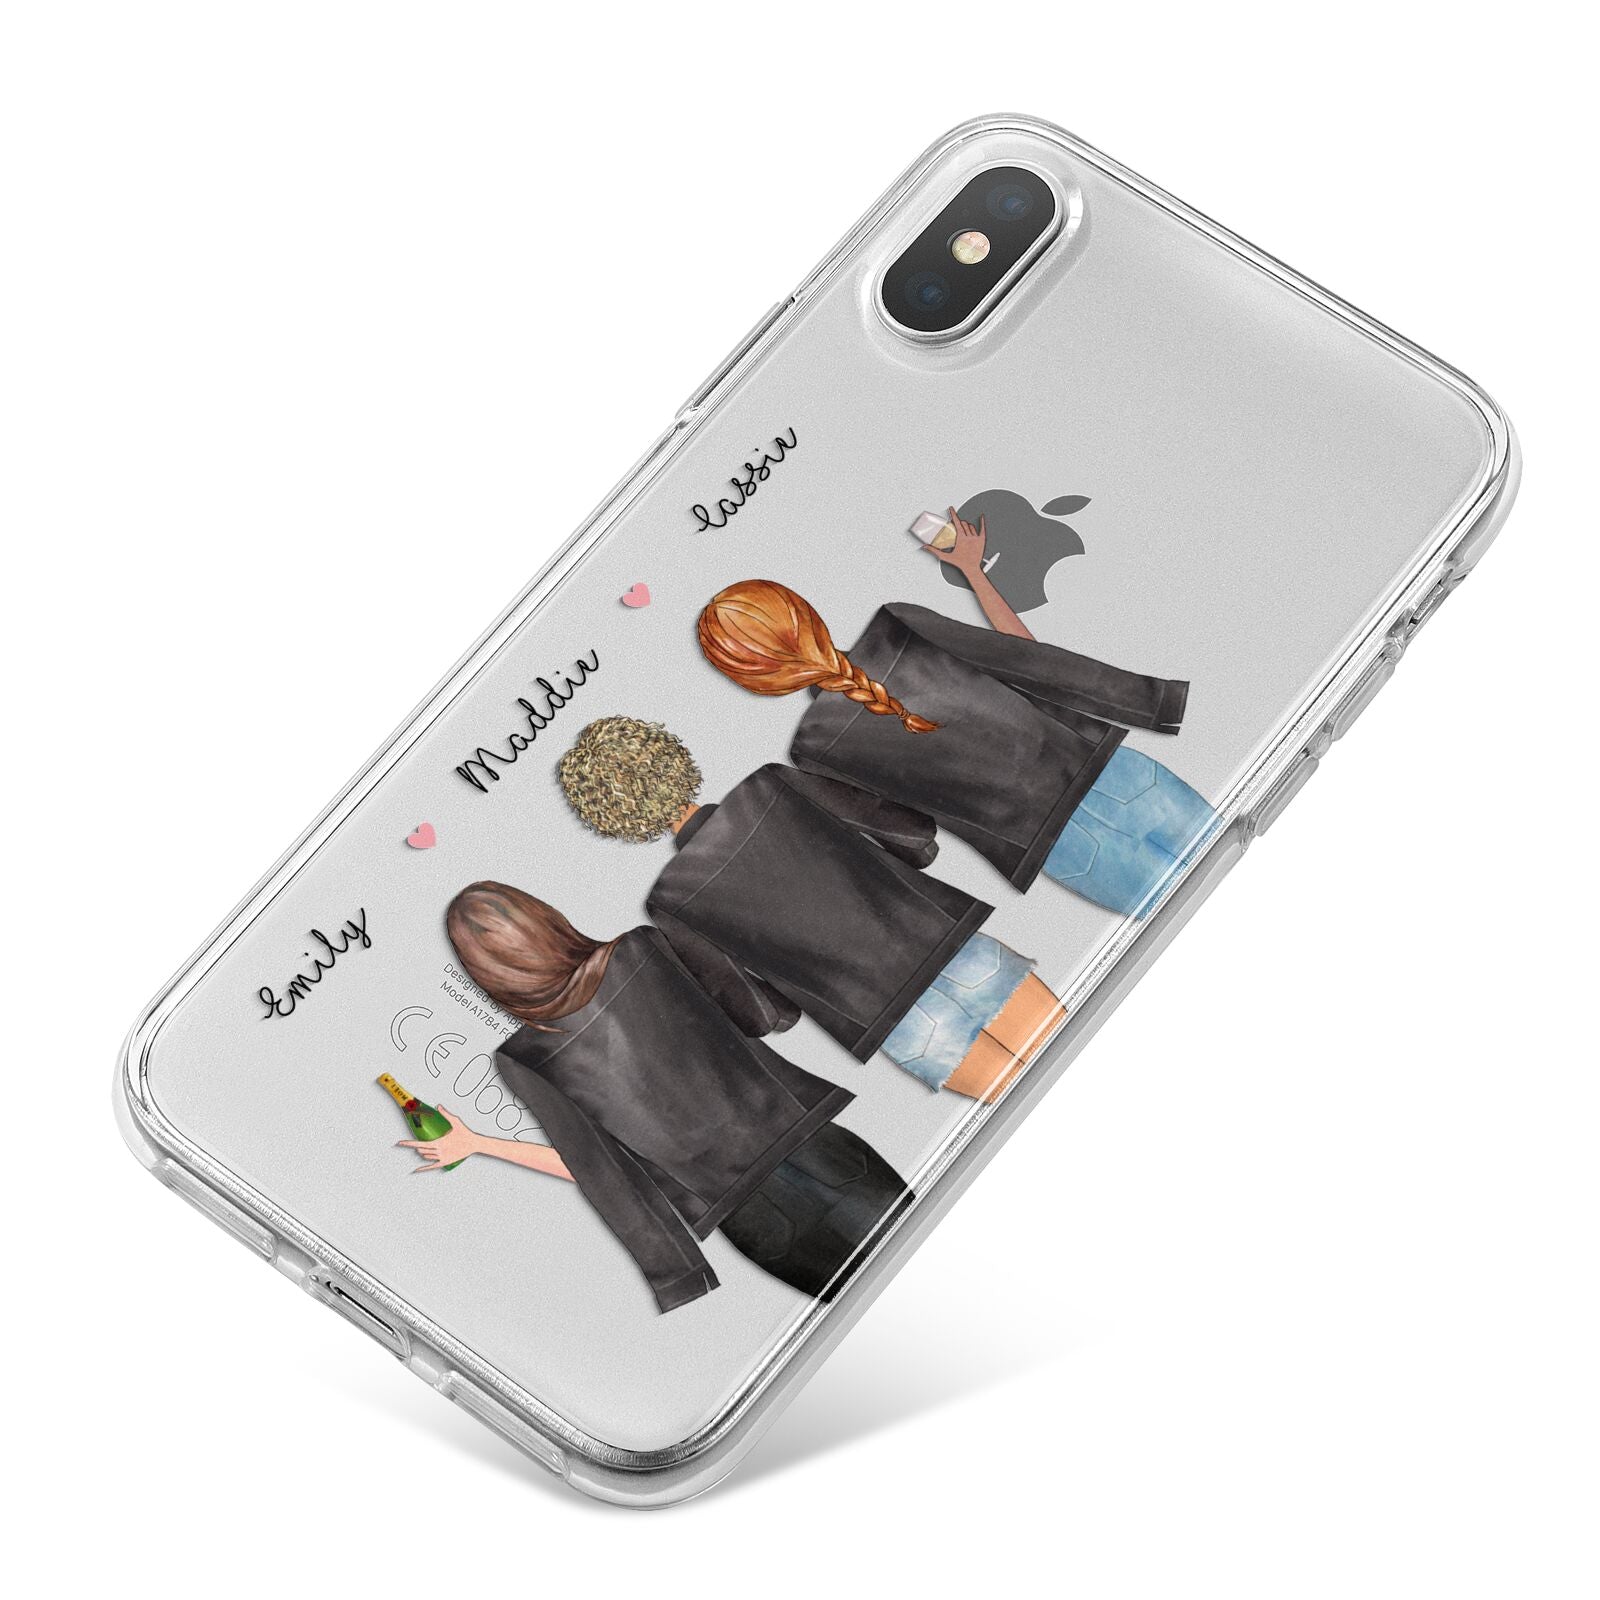 3 Best Friends with Names iPhone X Bumper Case on Silver iPhone